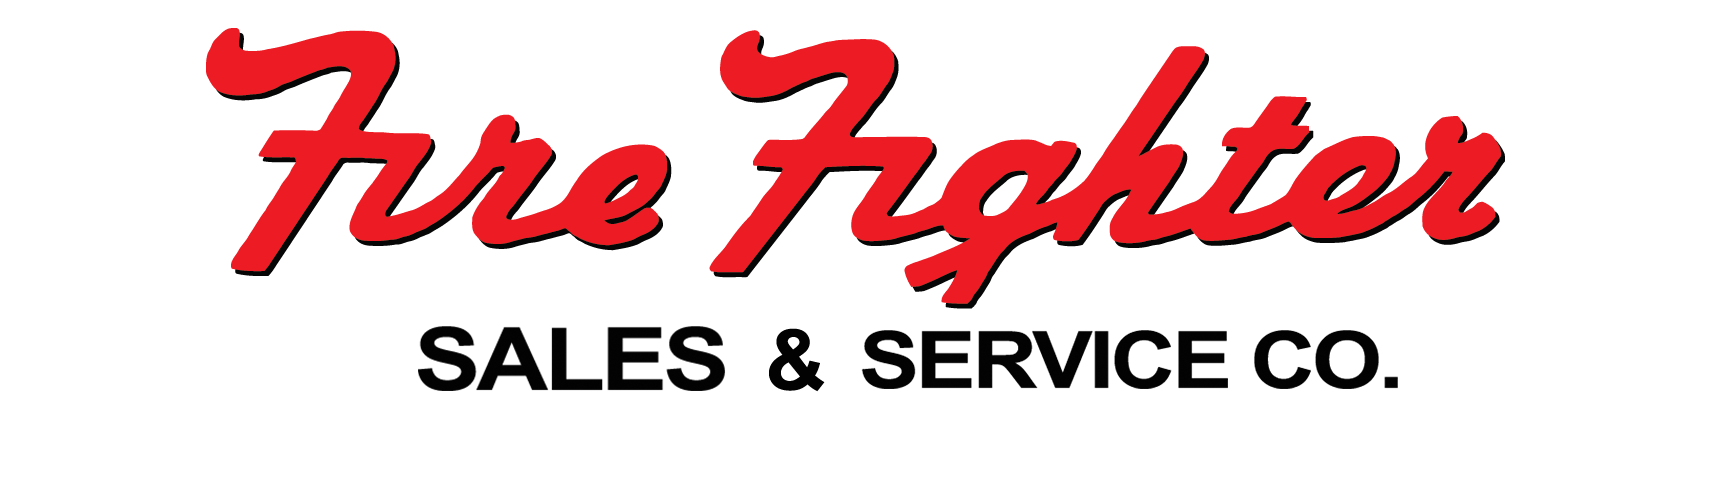 Fire Fighter Sales and Service Company logo